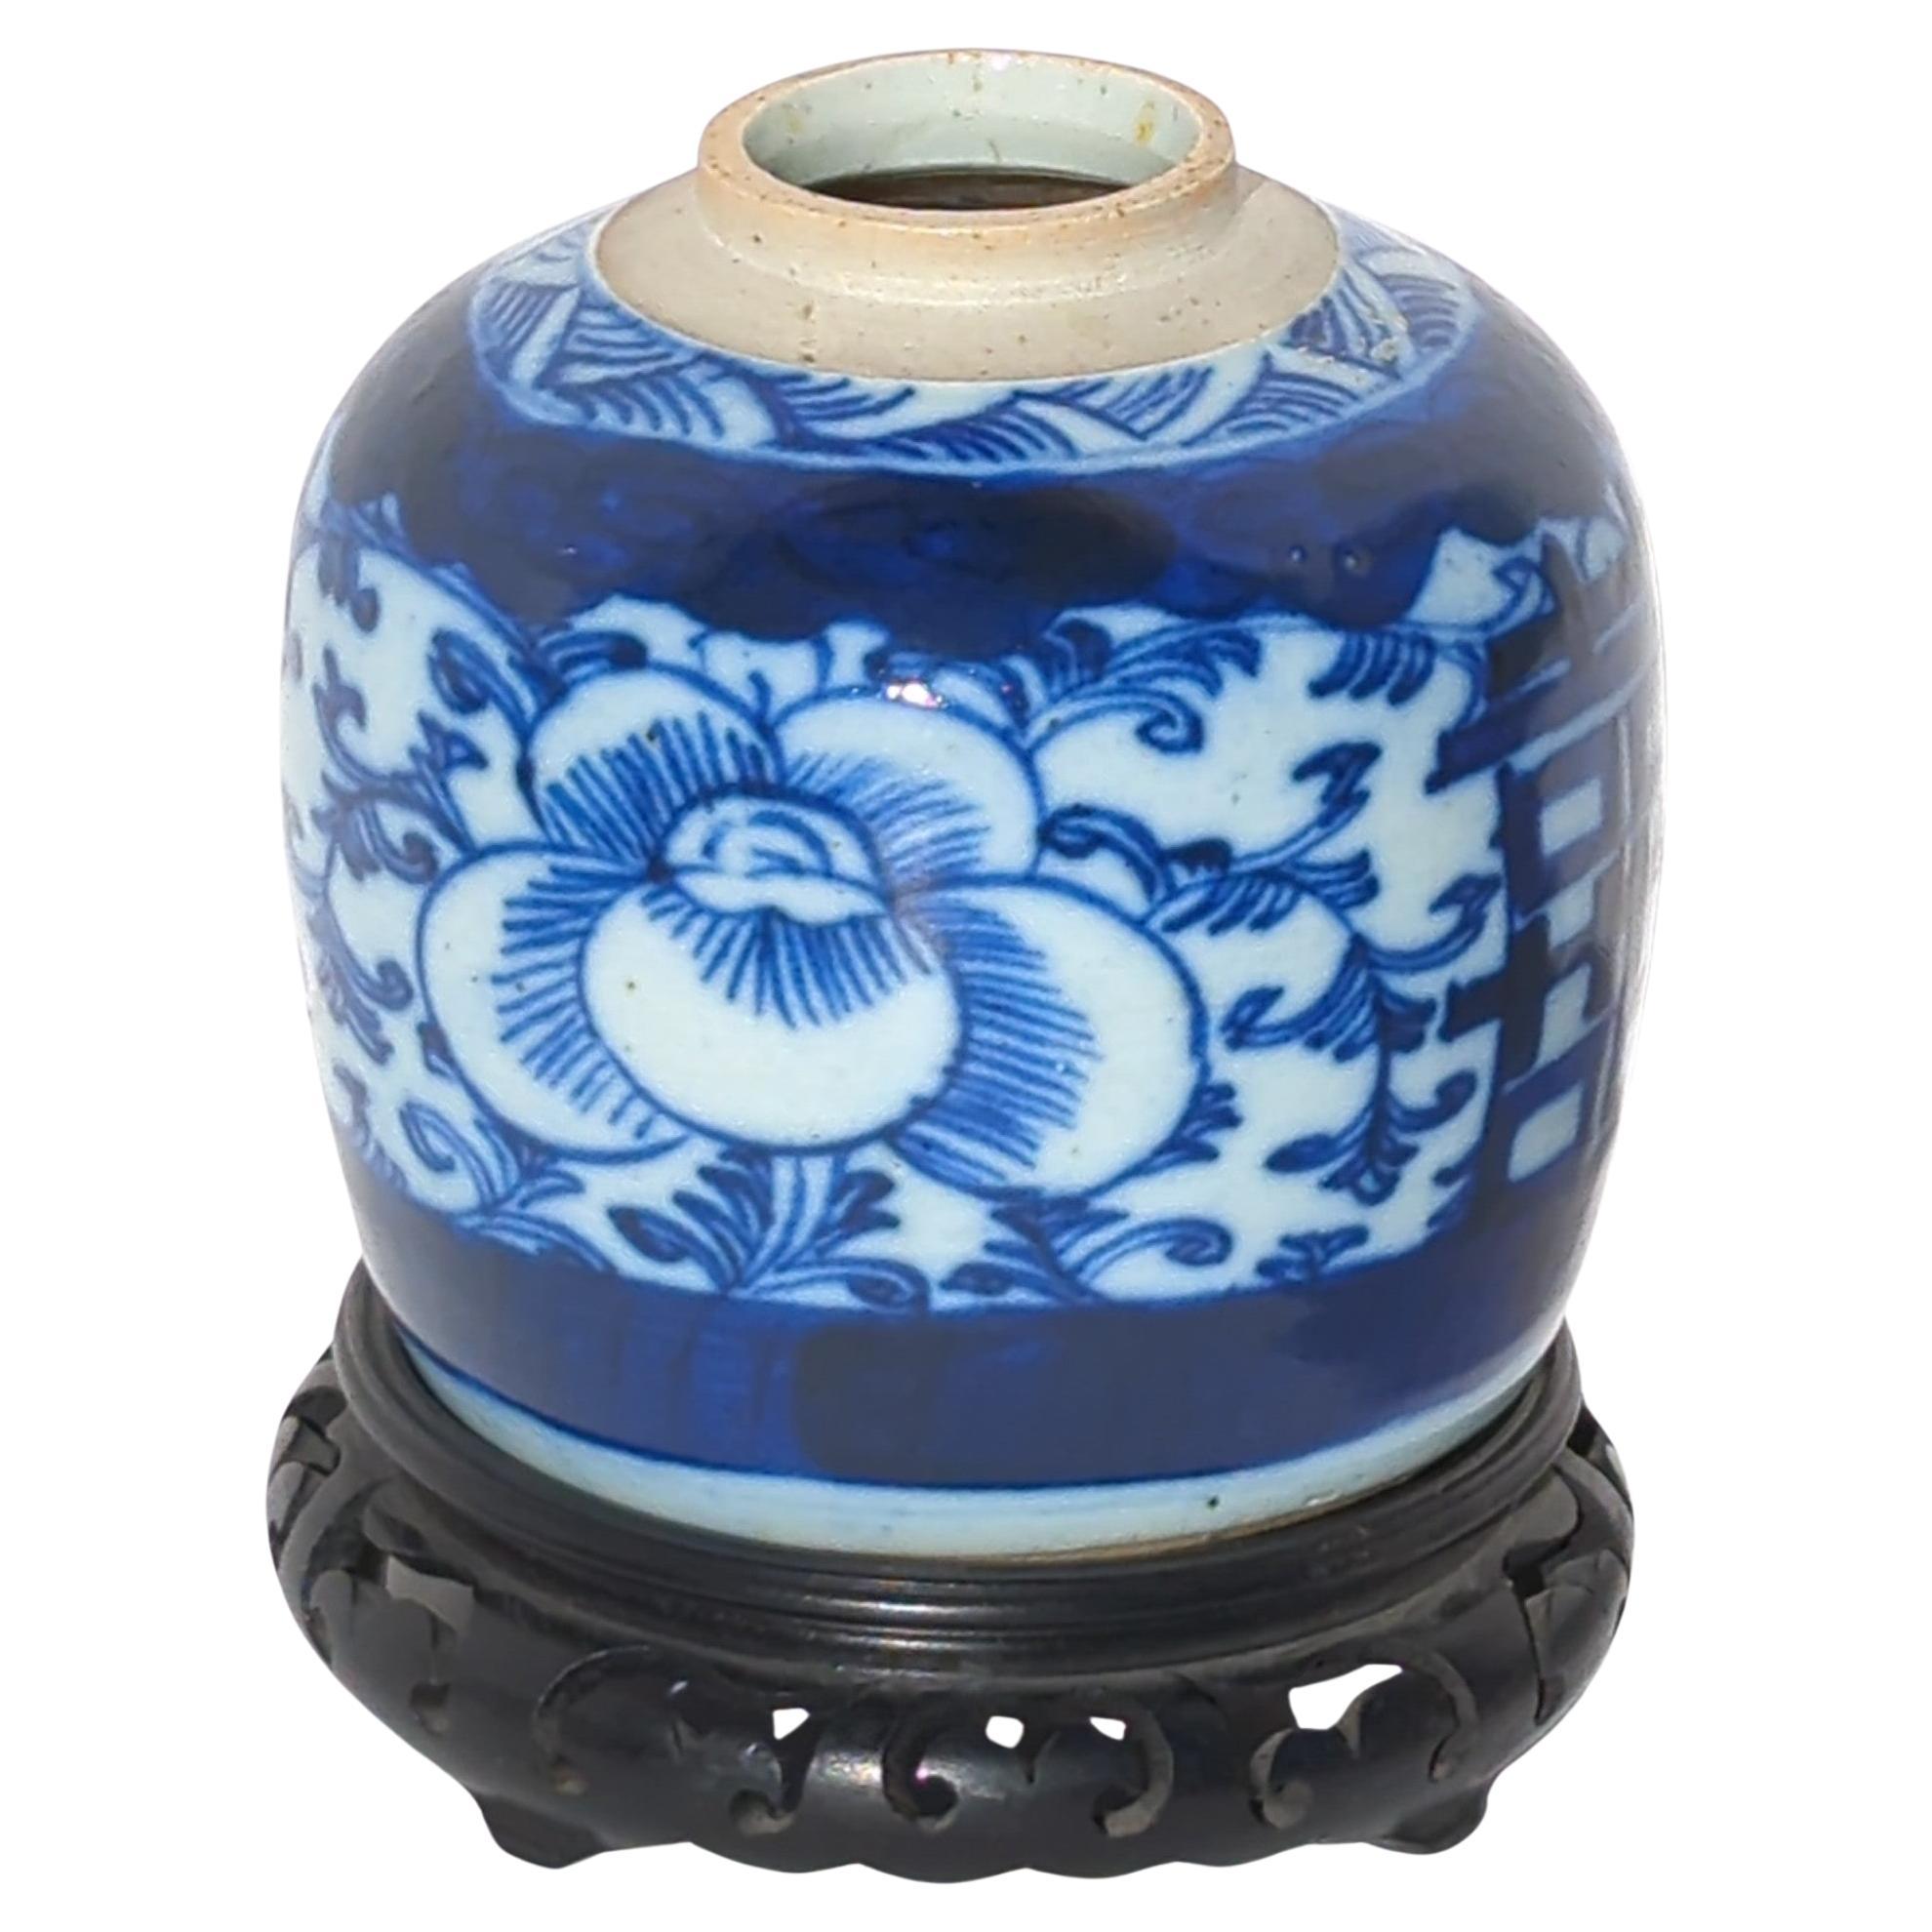 Antique Chinese Qing dynasty blue and white ginger jar, hand painted with two double happiness characters on scrolling foliage background with large peony blossoms in cobalt blue. 

Comes with hardwood stand.

Vase size: H: 5